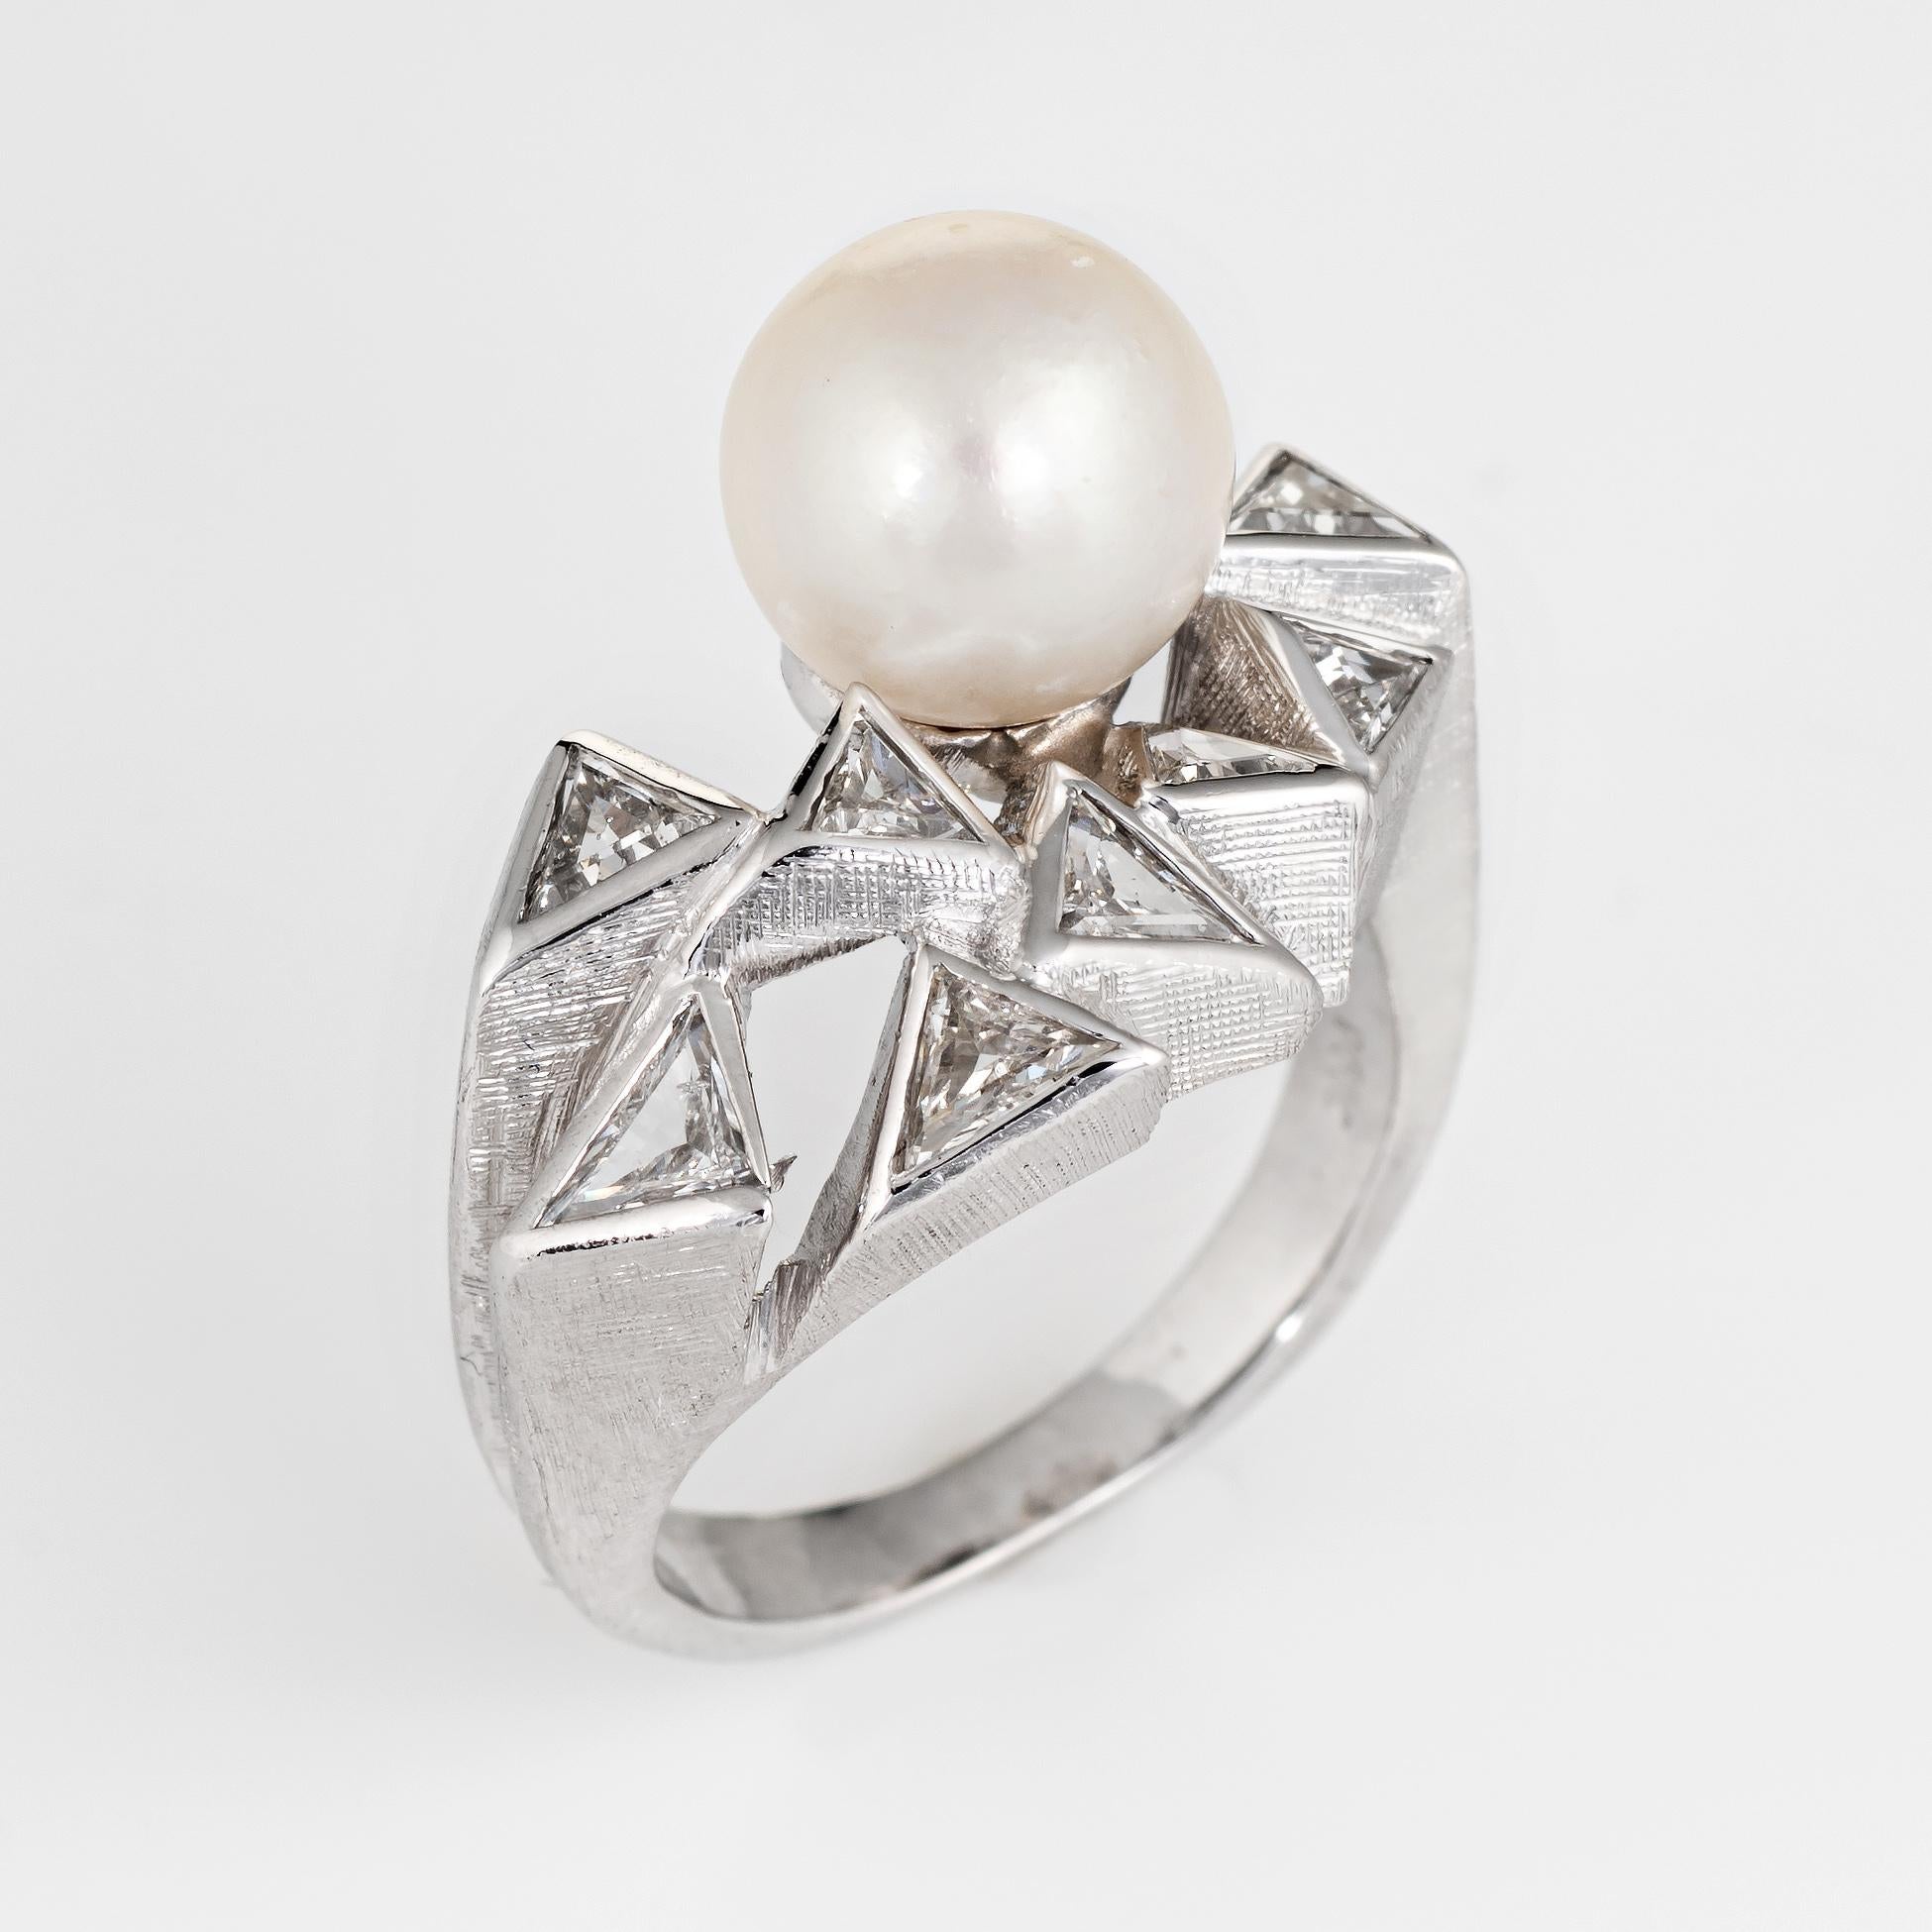 Stylish vintage cultured pearl & diamond ring (circa 1980s), crafted in 14 karat white gold. 

Cultured pearl measures 8mm accented with 8 estimated 0.10 carat trillion cut diamonds. The total diamond weight is estimated at 0.80 carats (estimated at